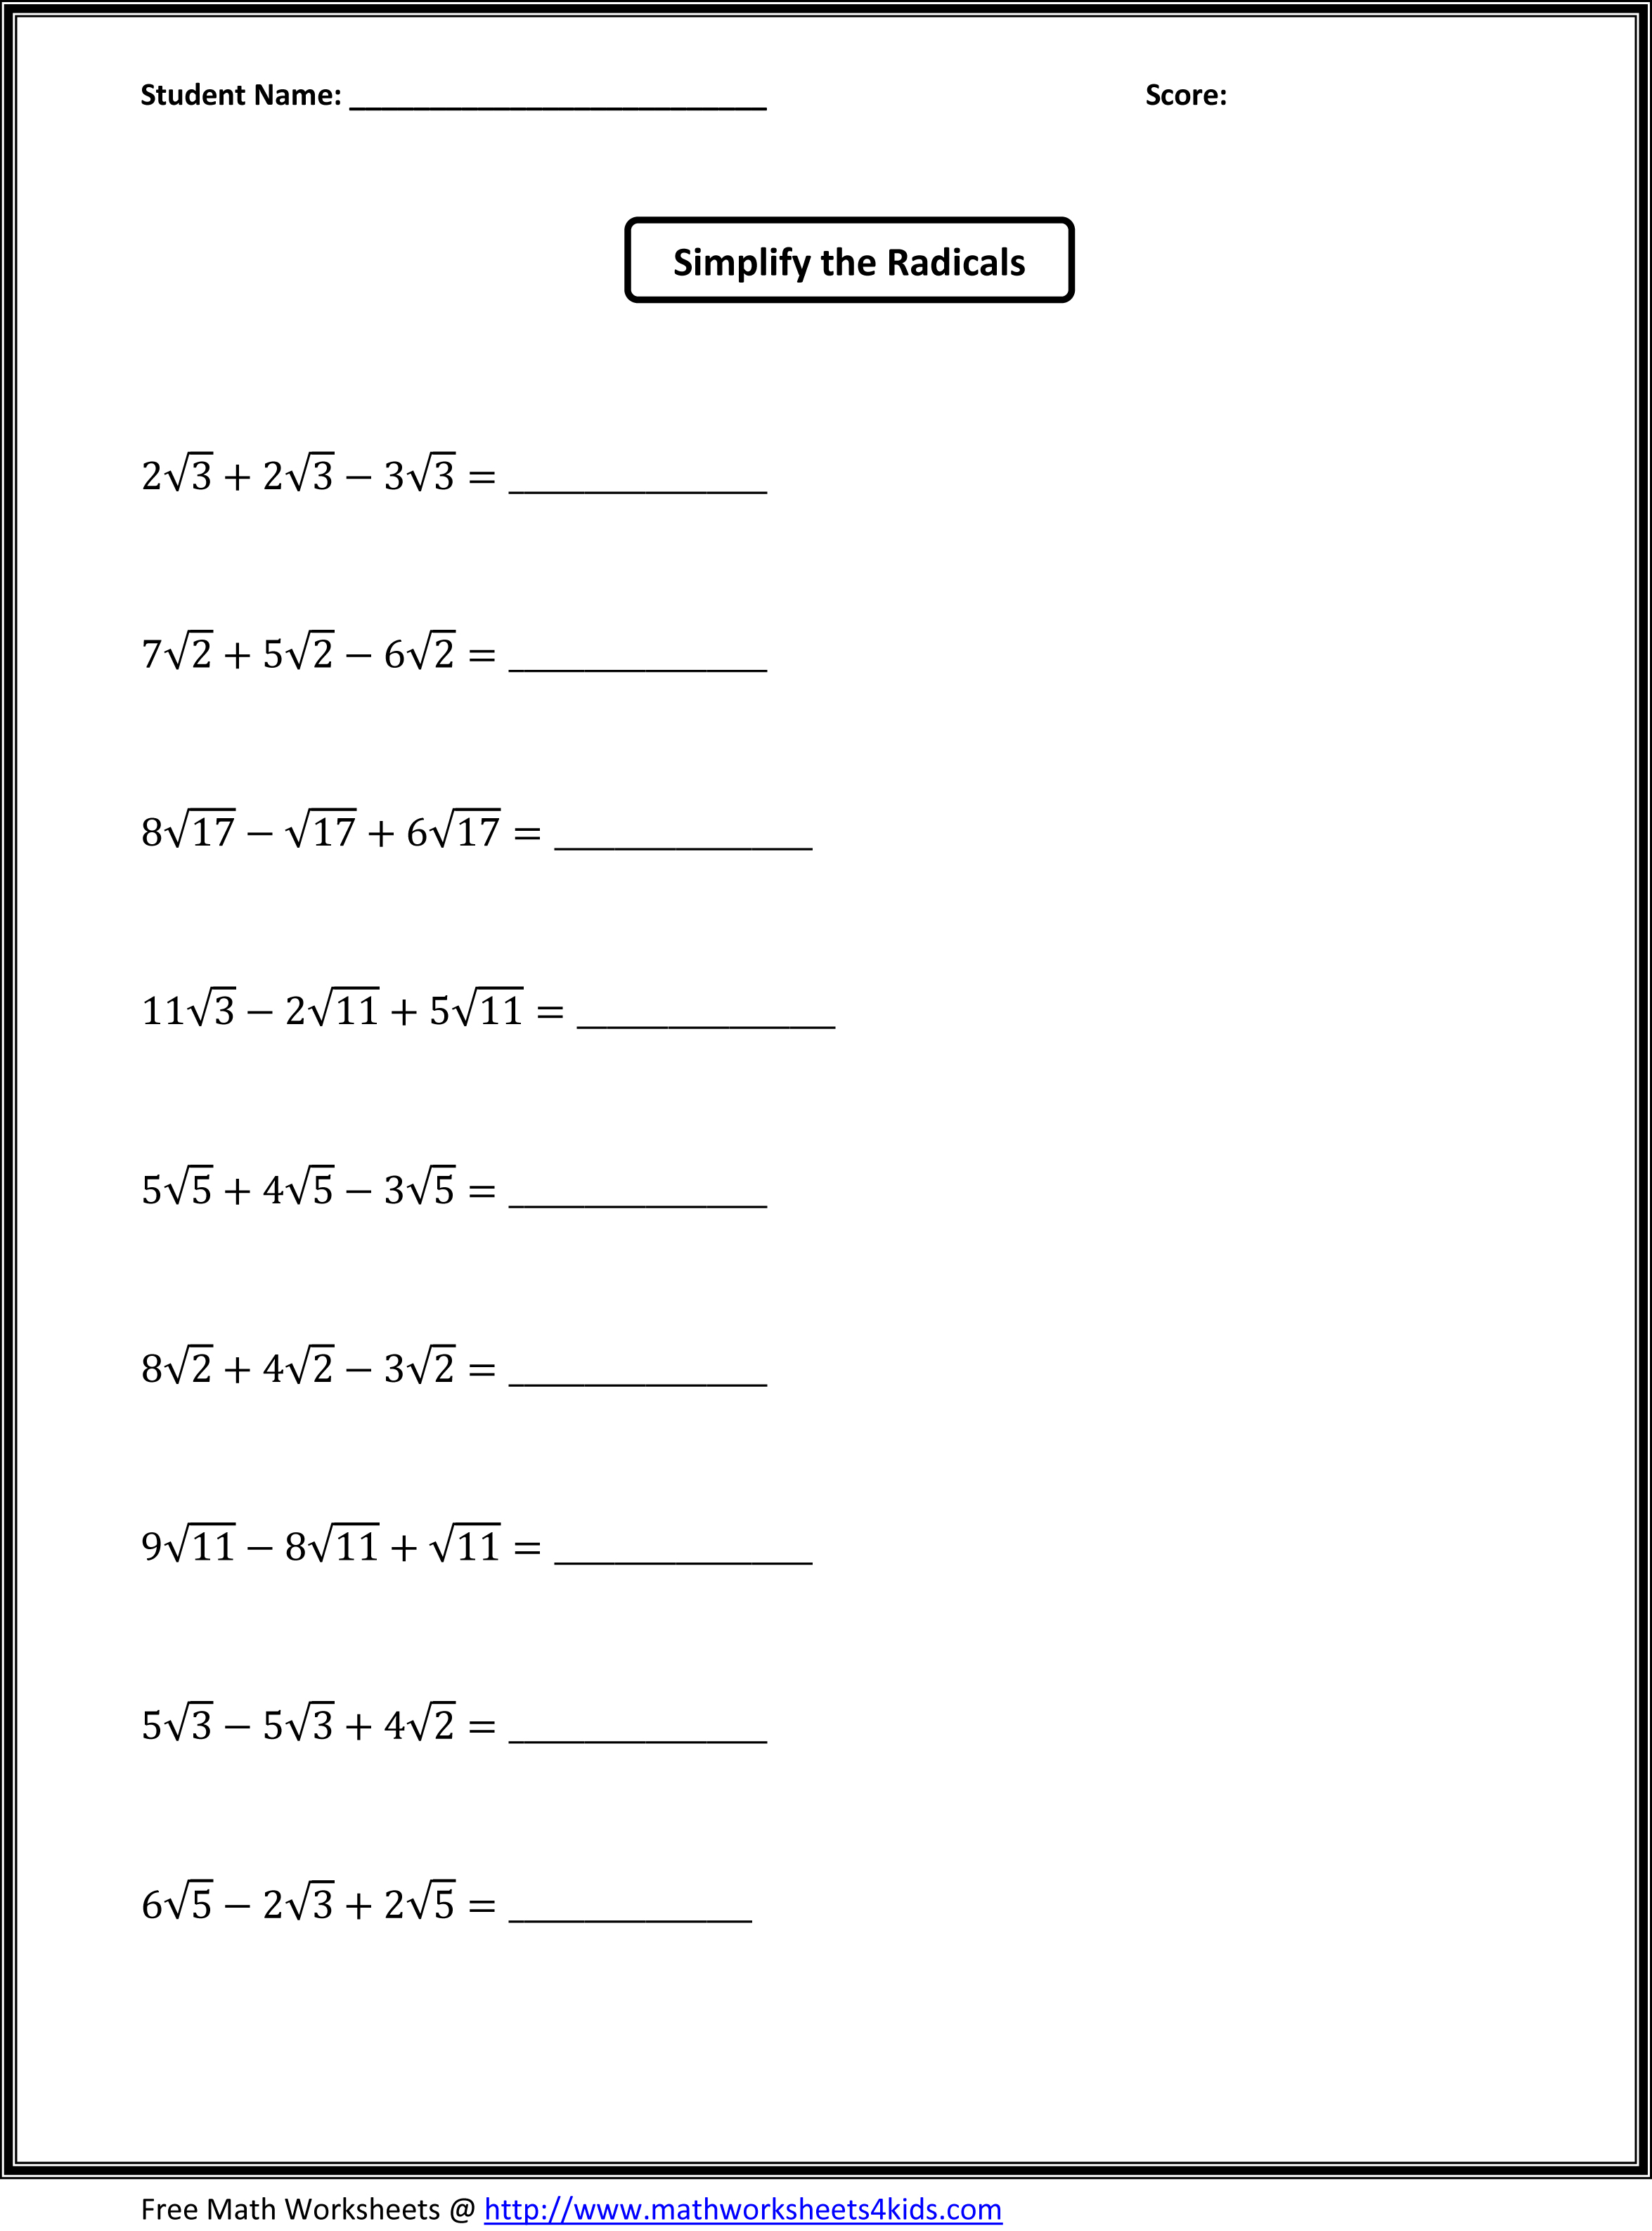 12 Best Images of 7th Grade Math Worksheets Problems - 7th Grade Math